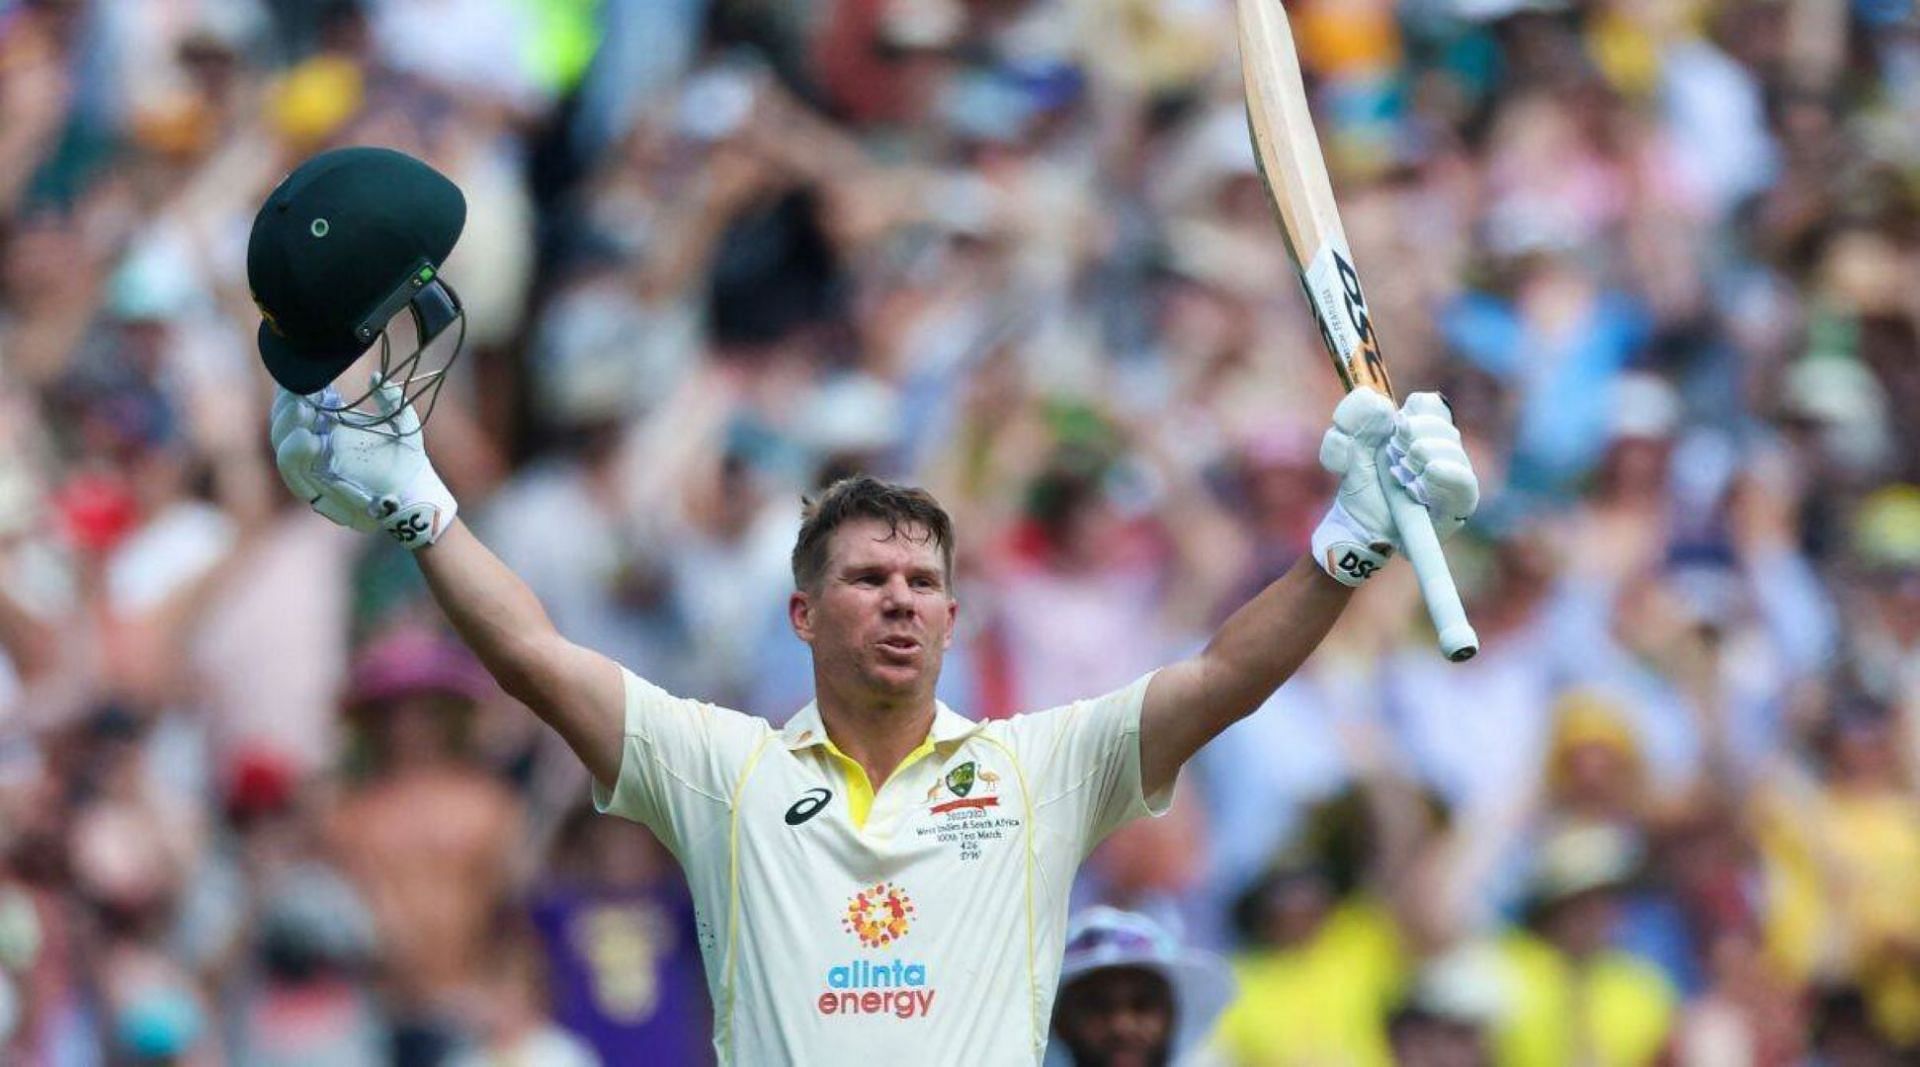 David Warner will look to stamp his authority in the WTC final against India